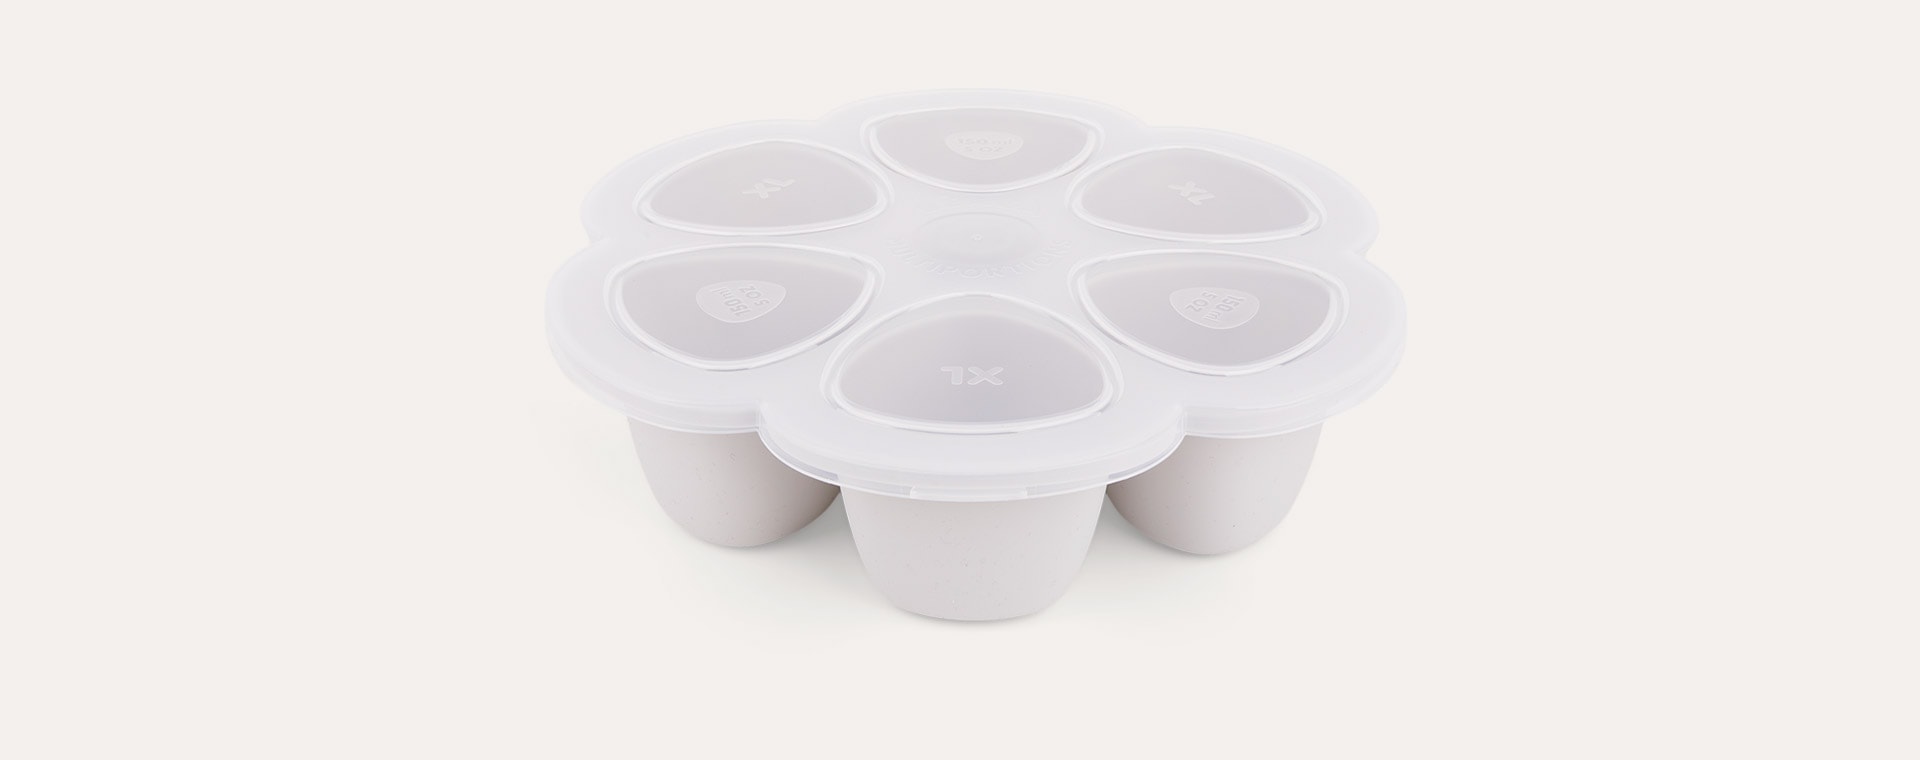 Light Mist Beaba Multi-Portion Food Containers - 6 x 150ml